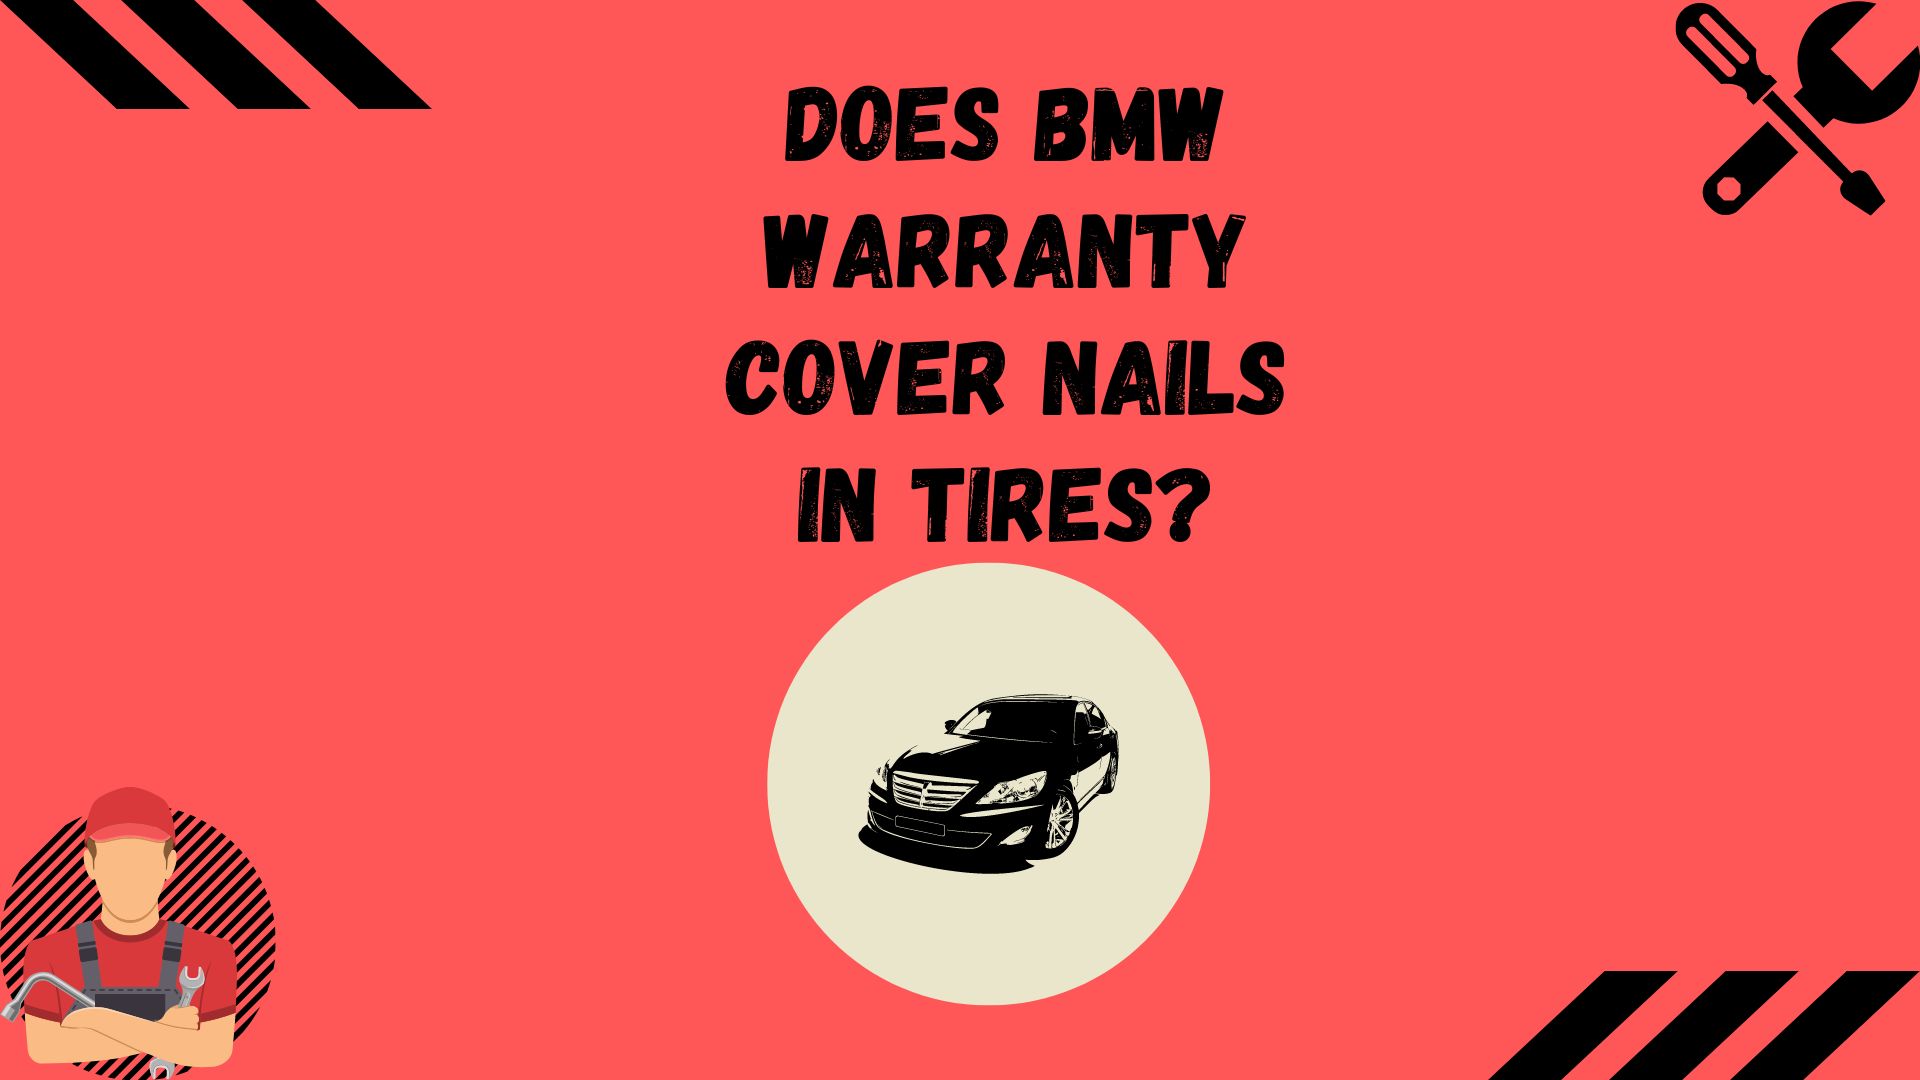 Does The BMW Warranty Cover Nails In Tires